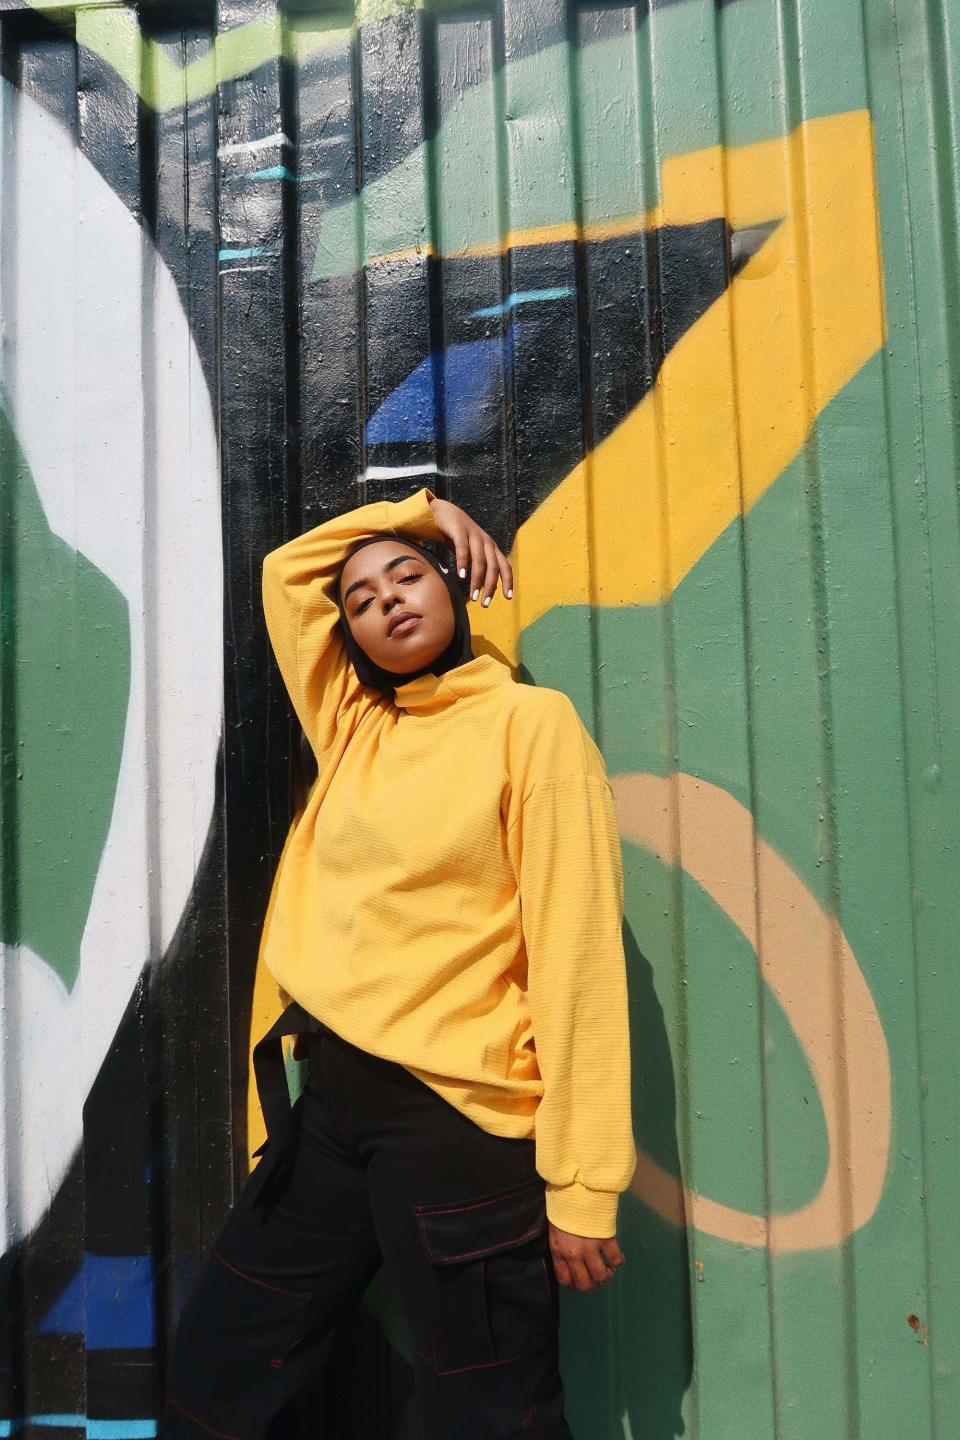 With 200k YouTube followers and counting, Somali-American beauty blogger Shahd Batal hopes that young women of all backgrounds are inspired by her videos, and her life.